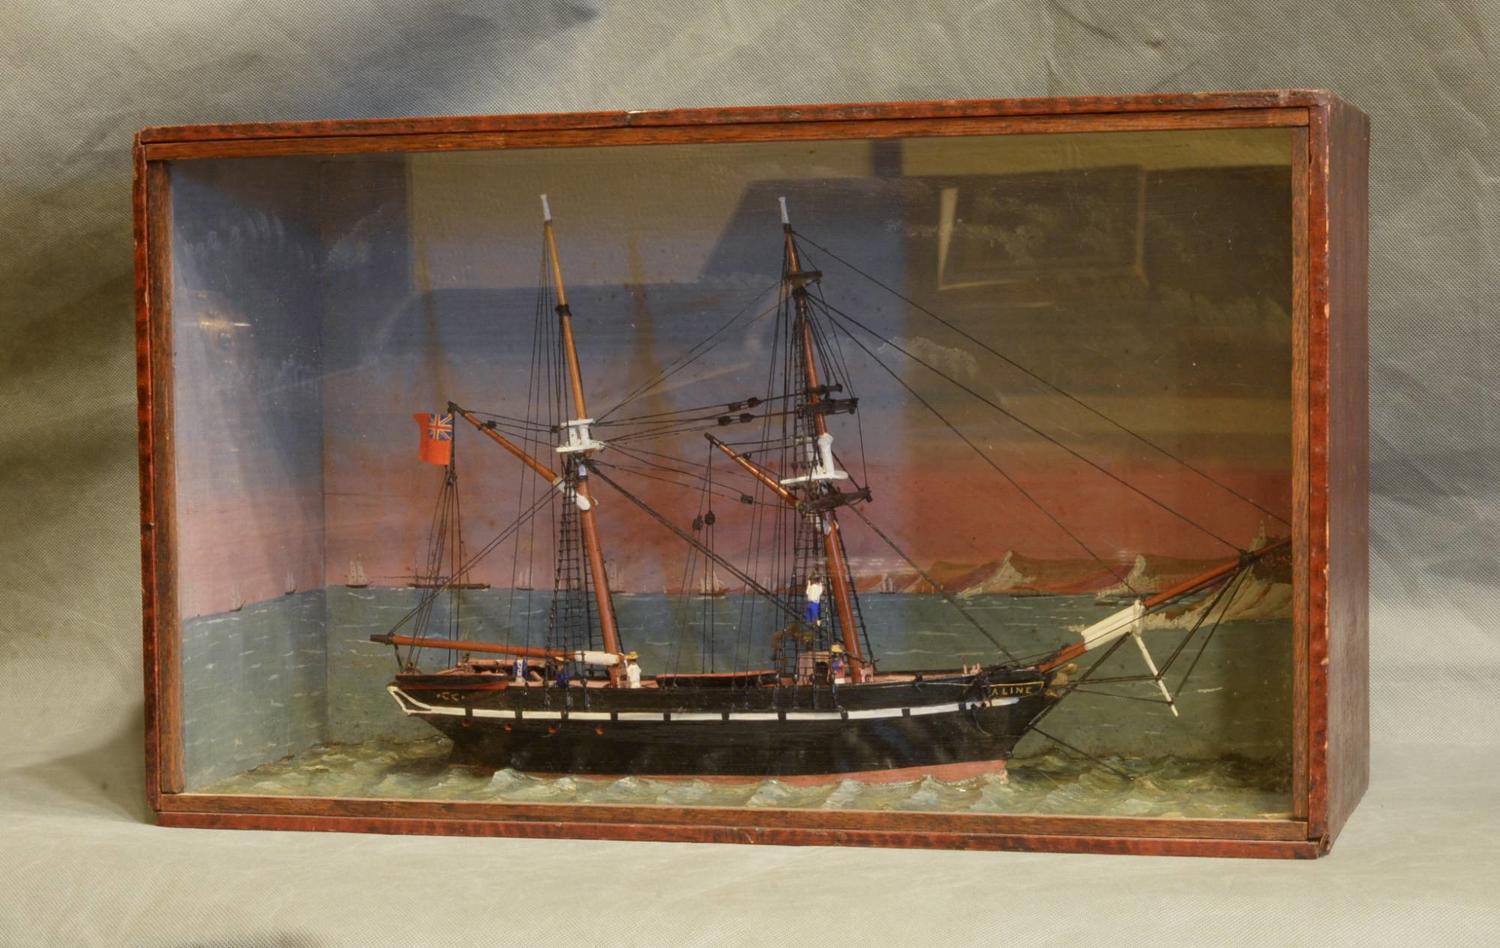 Waterline Model of a Two Masted Sailing Vessel